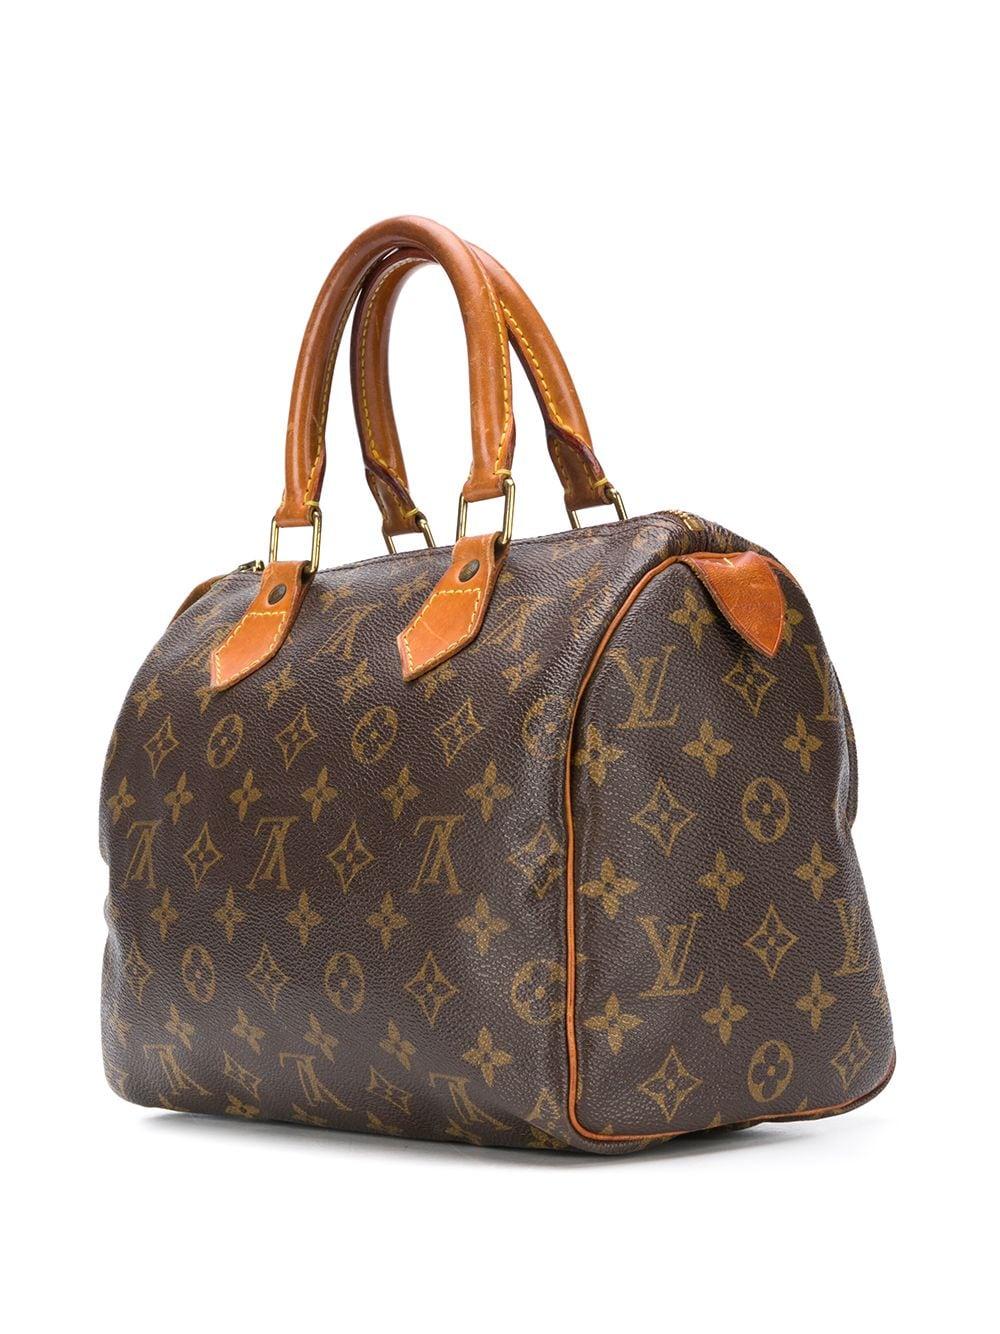 This meticulously hand-painted Louis Vuitton 'Dioreebok' Speedy bag from Rewind's Emotional Baggage collection, where iconic handbags are specially customized with hand-painted illustrations, is perfect for that weekend getaway. Expertly crafted in